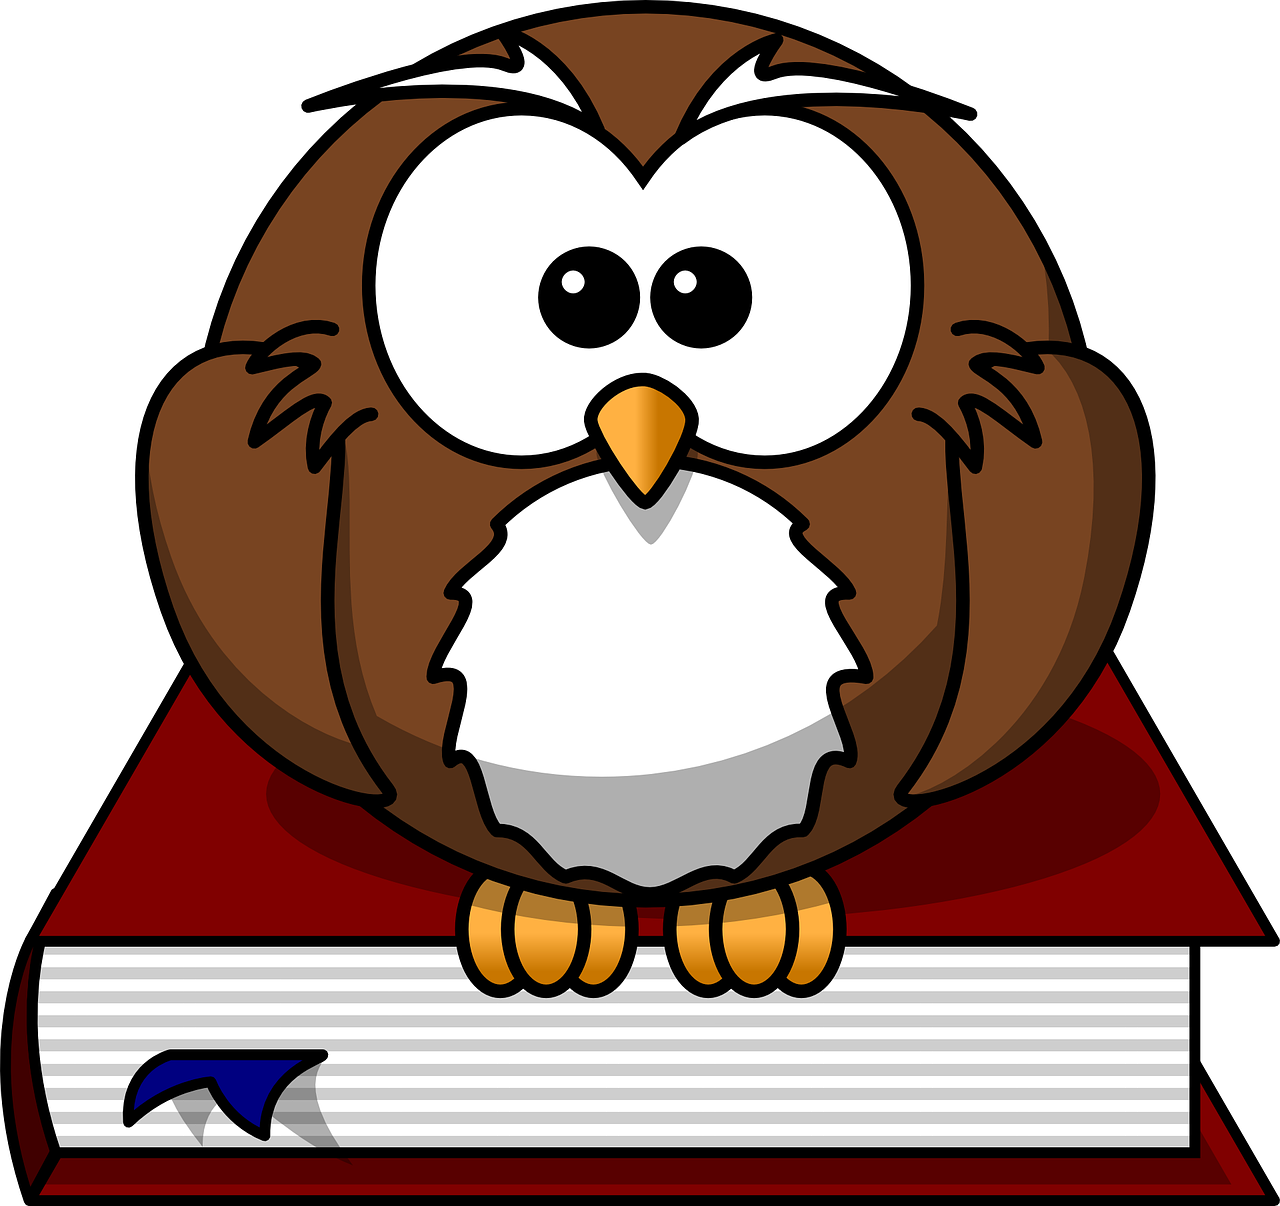 Colorful drawing of an owl sitting on a book, 